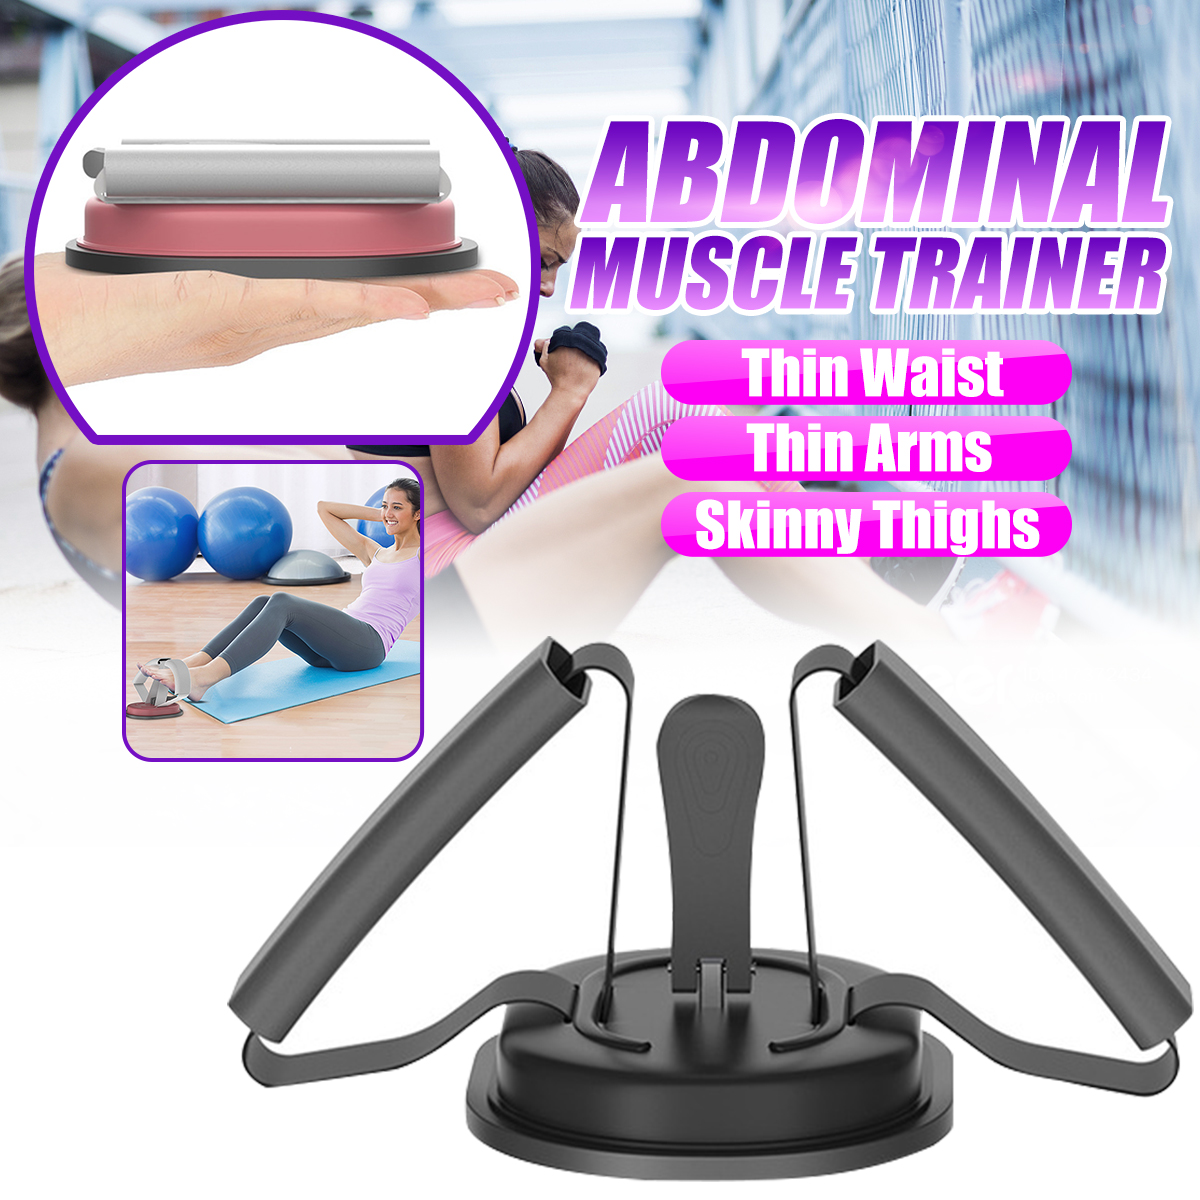 Sit-up-Abdominal-Muscle-Trainer-Roller-Crunch-Core-Worker-Abs-Exercise-Machine-Gym-Tools-Adjustable--1660146-1